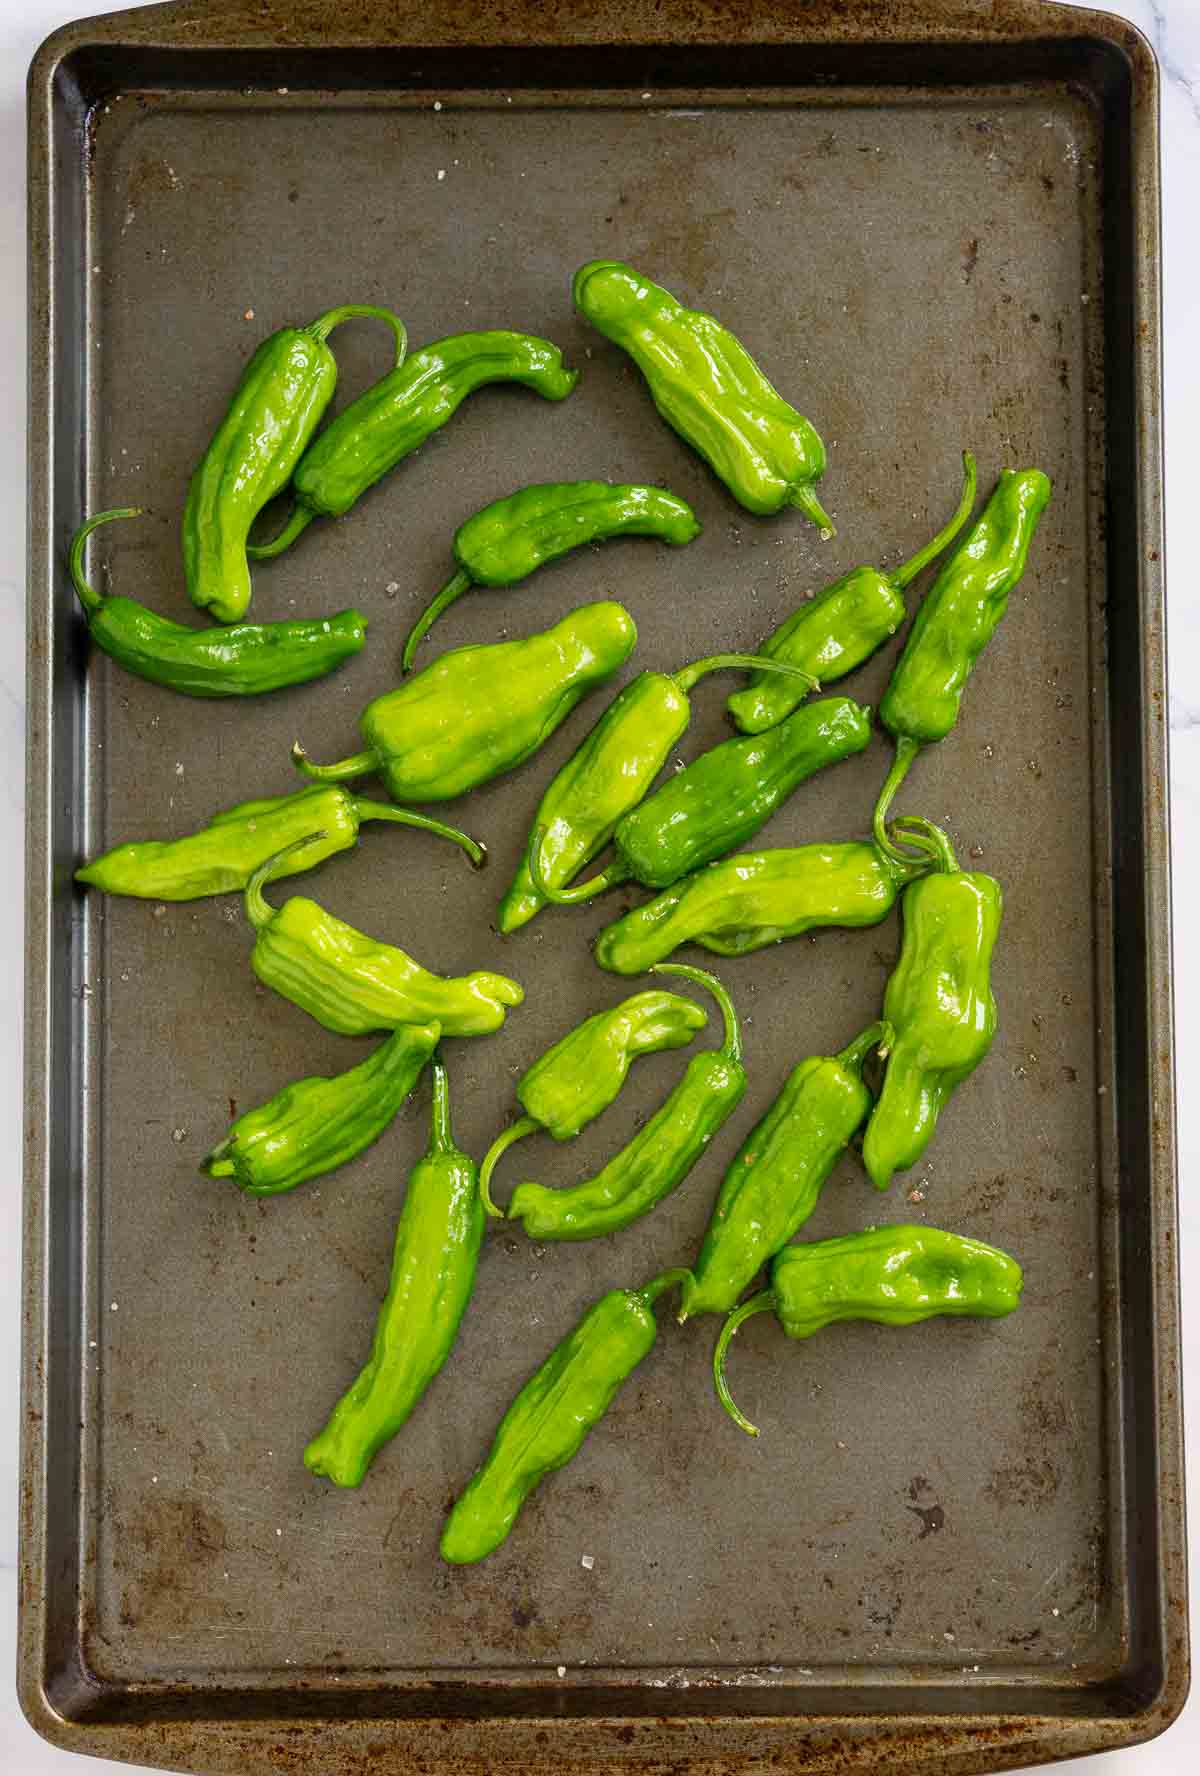 Uncooked shishito peppers on a baking pan tossed with olive oil and sea salt